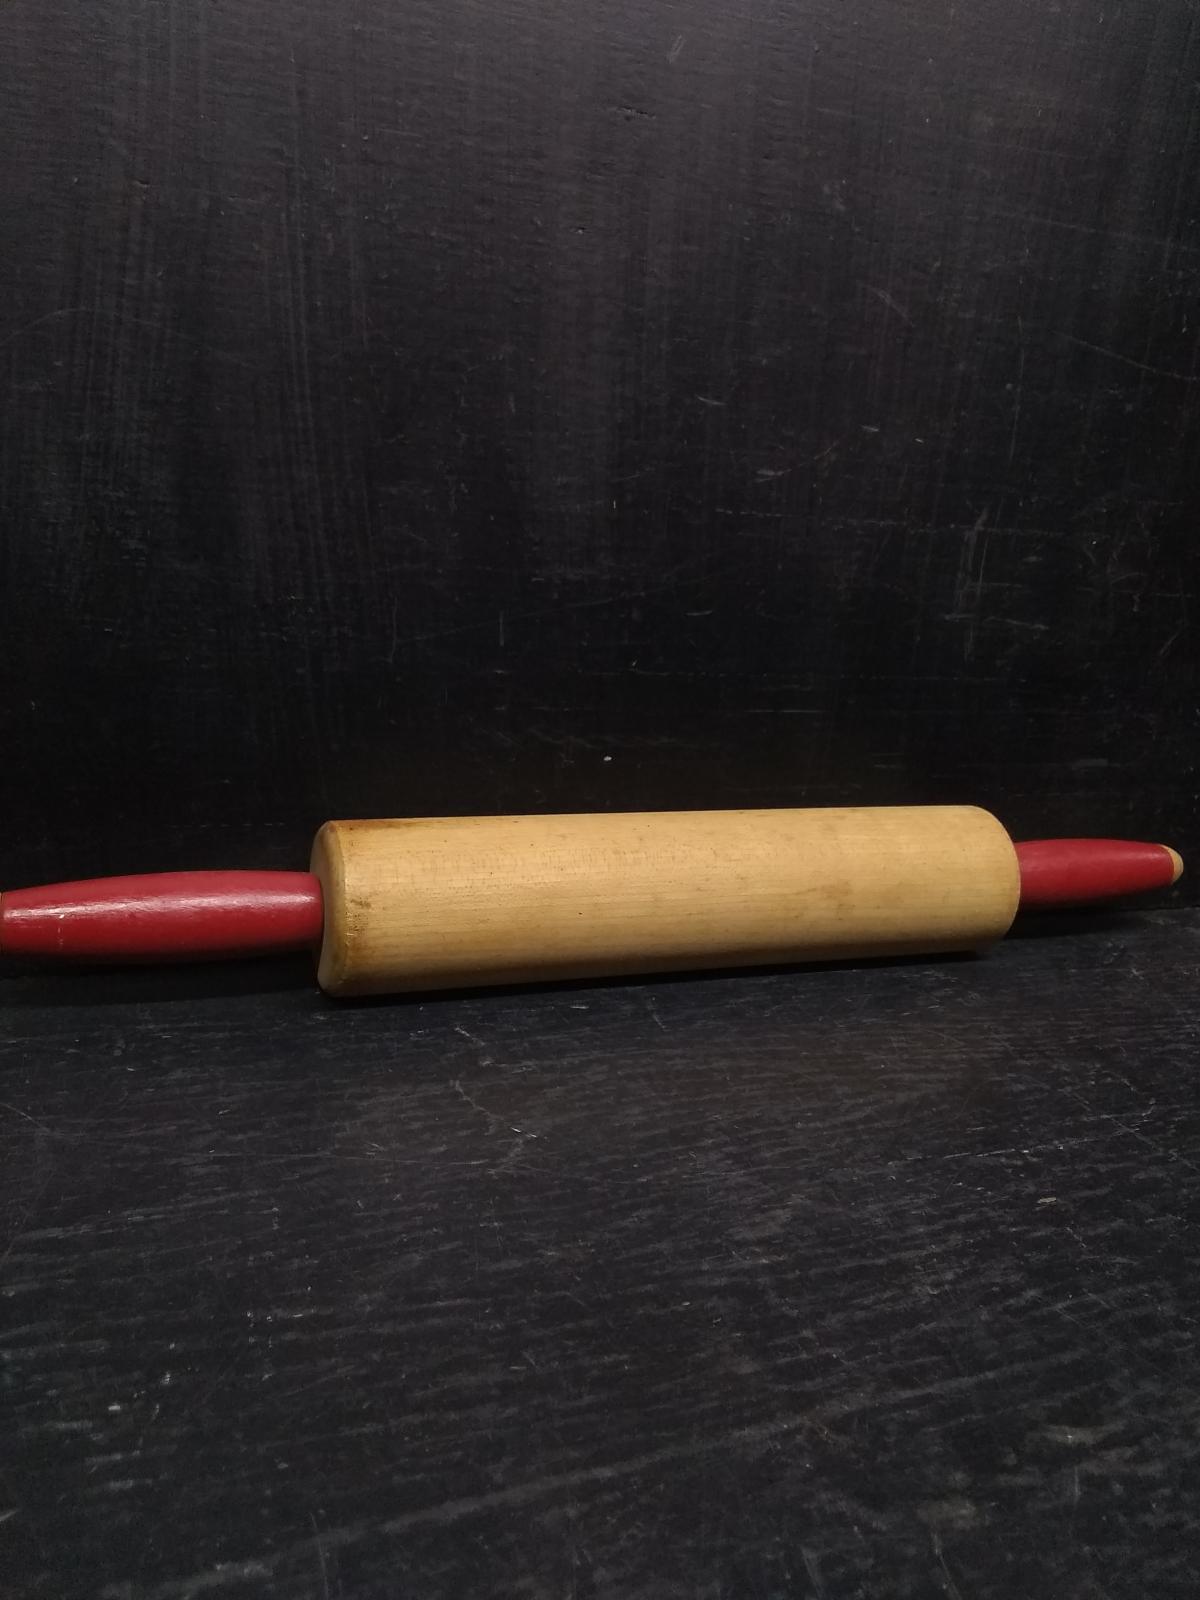 Antique Red Handle Rolling Pin